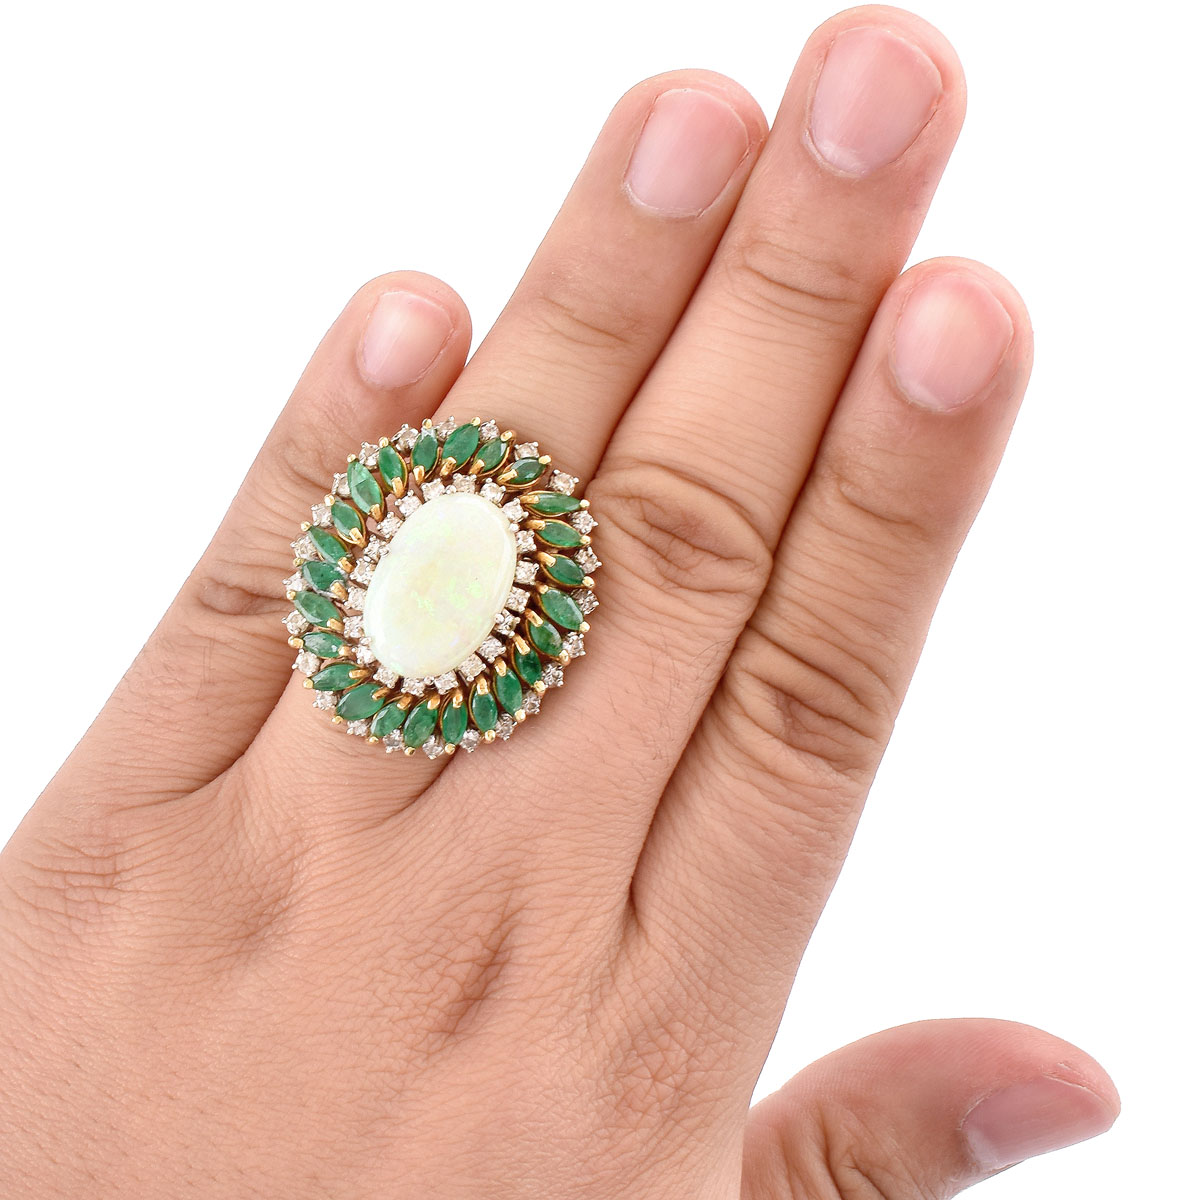 Vintage Oval Cabochon Opal, Marquise Cut Emerald, Round Brilliant Cut Diamond and 14 Karat White and Yellow Gold Ring / Pendant. Opal measures 18mm x 12mm, good play of multi color.